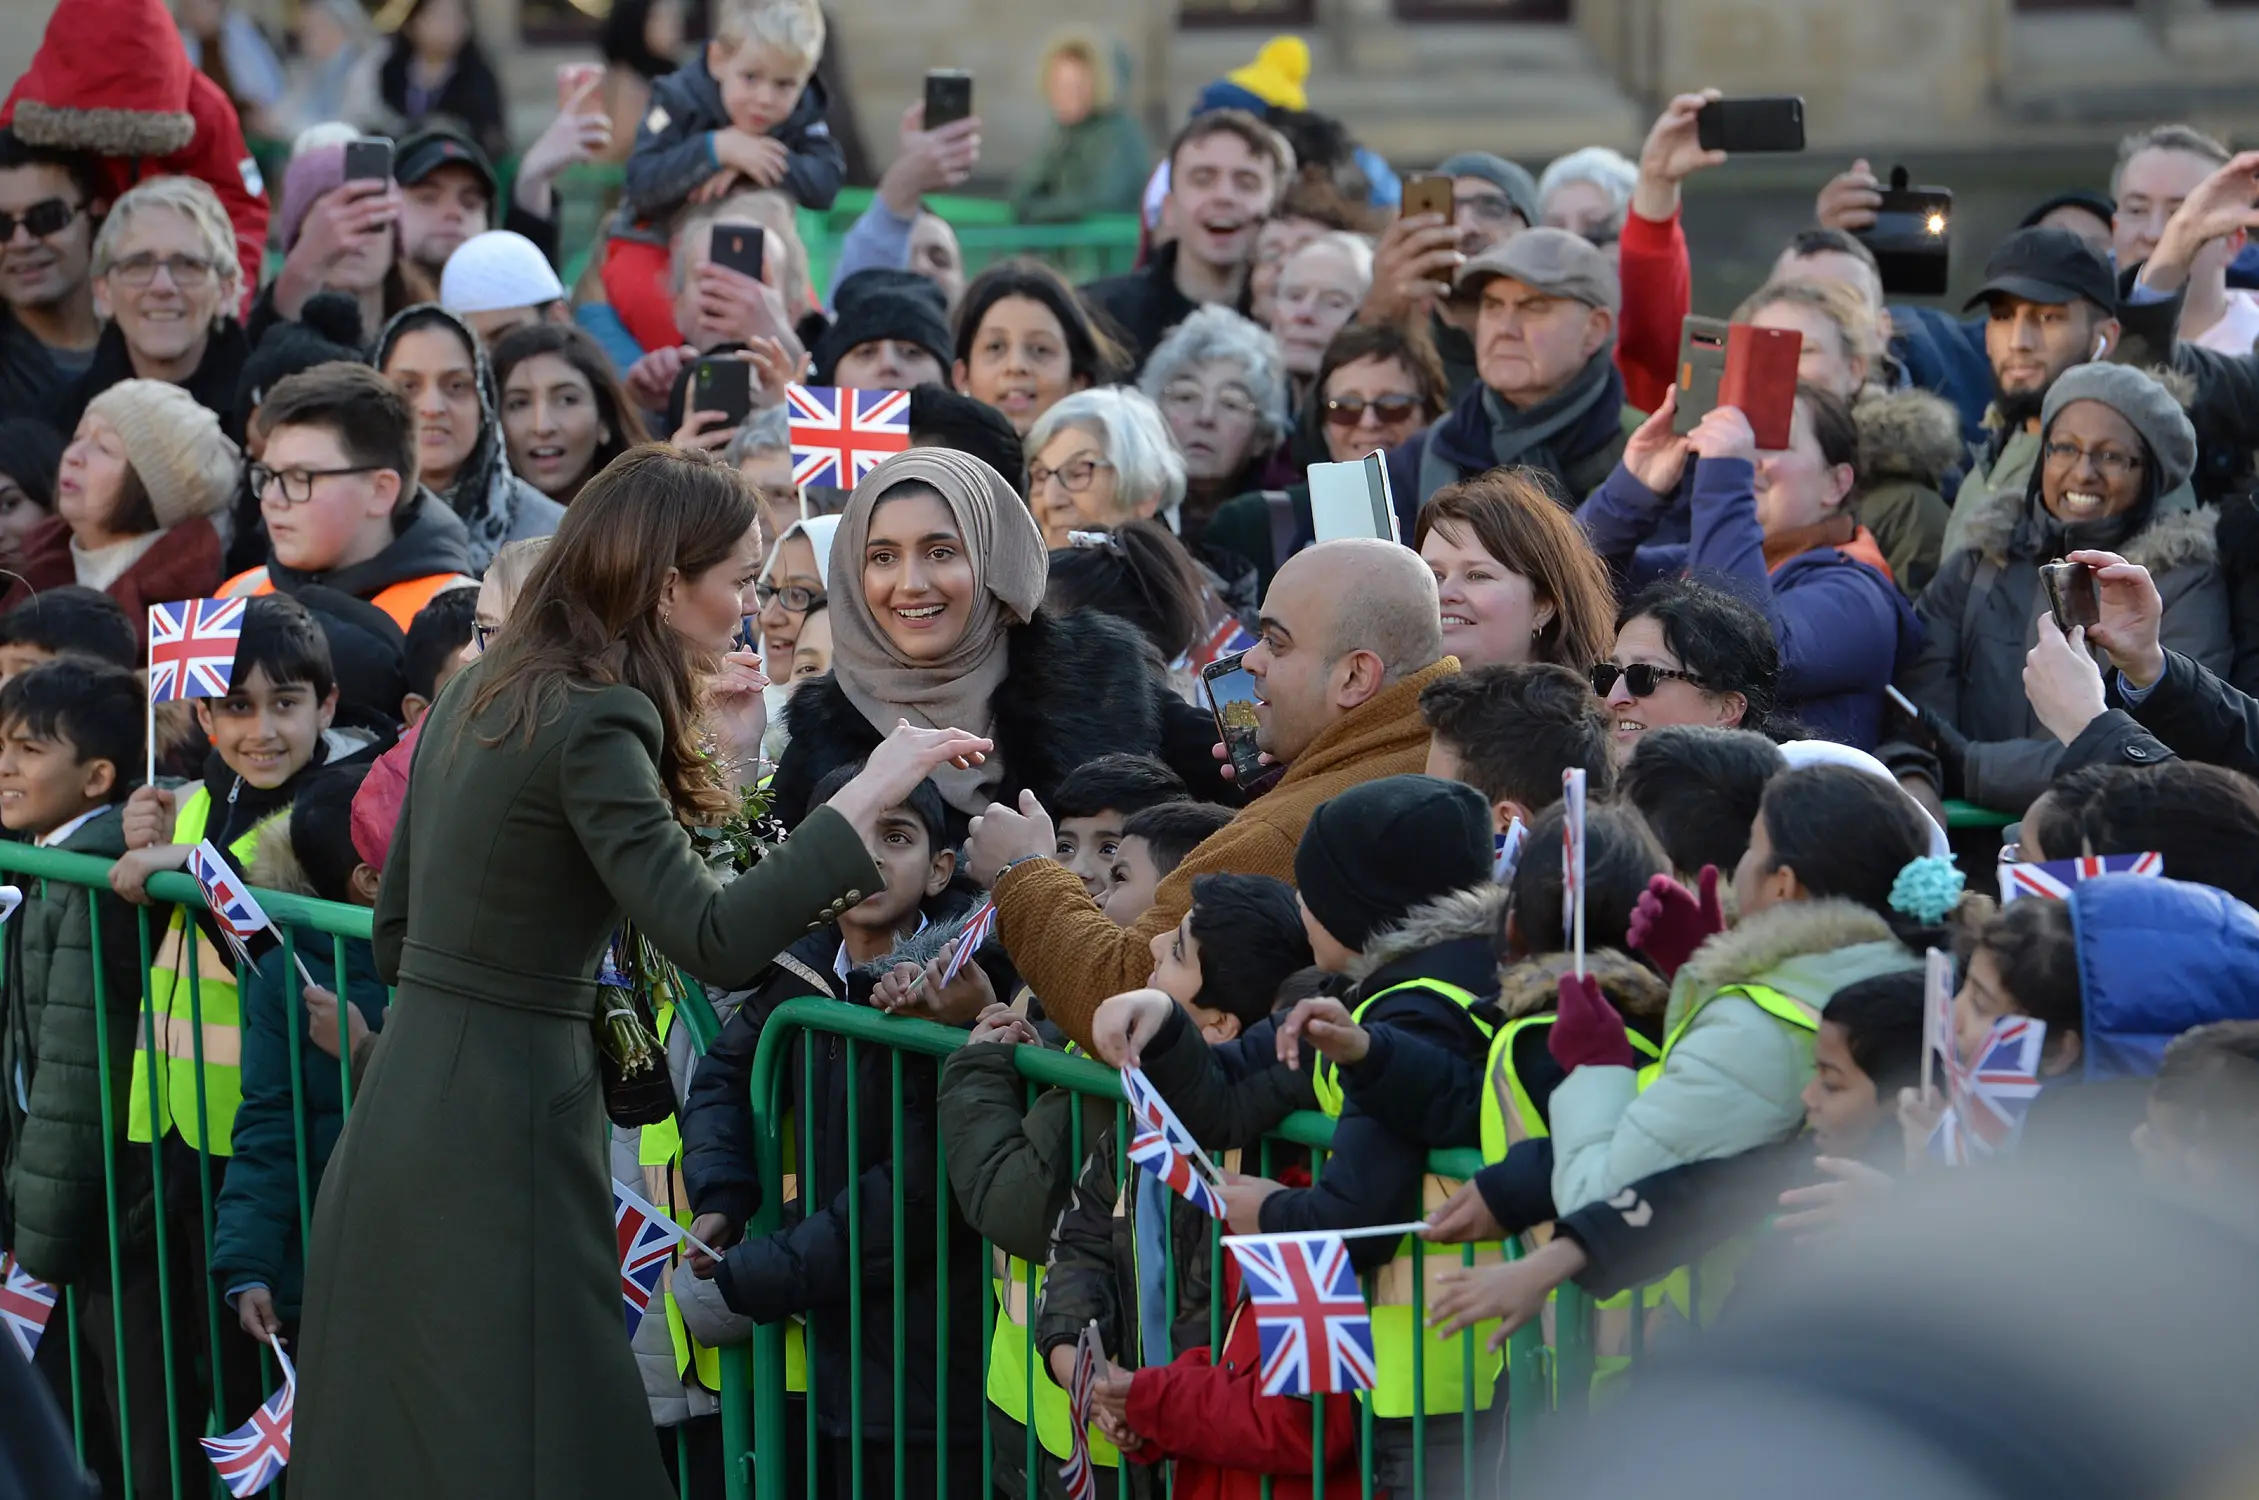 The Duke and Duchess of Cambridge met with locals during a visit to Bradford